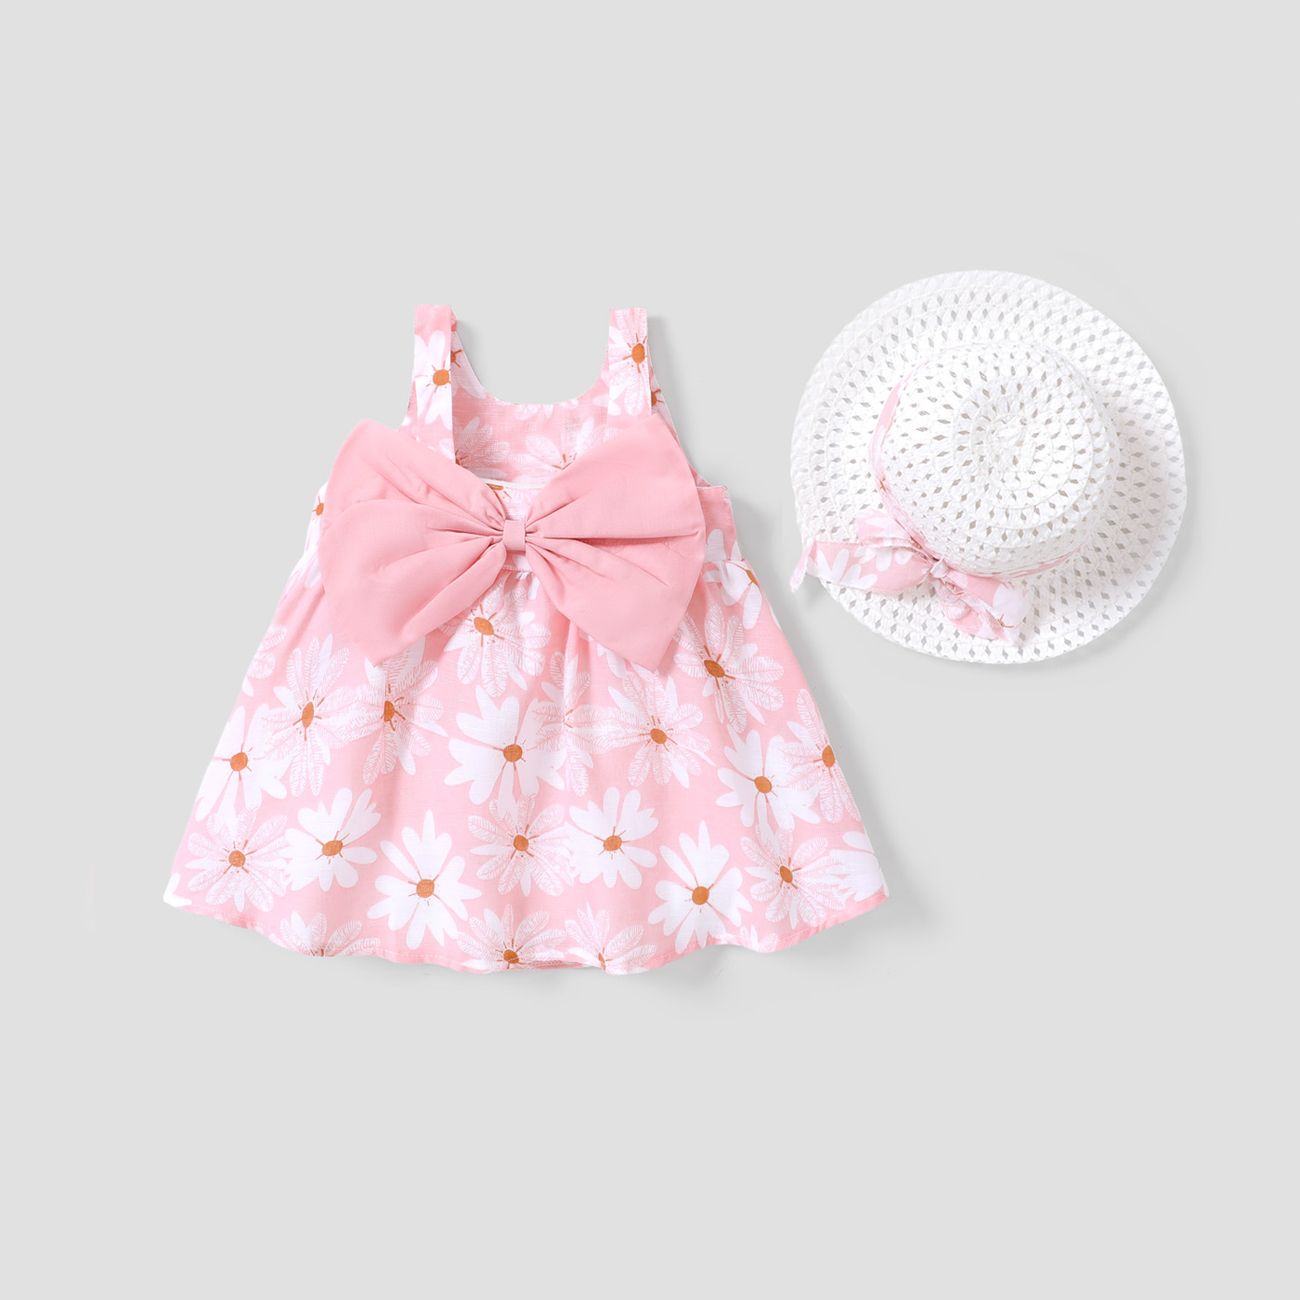 Buy Baby Girls Dresses Clothes Online for Sale - PatPat CA Mobile